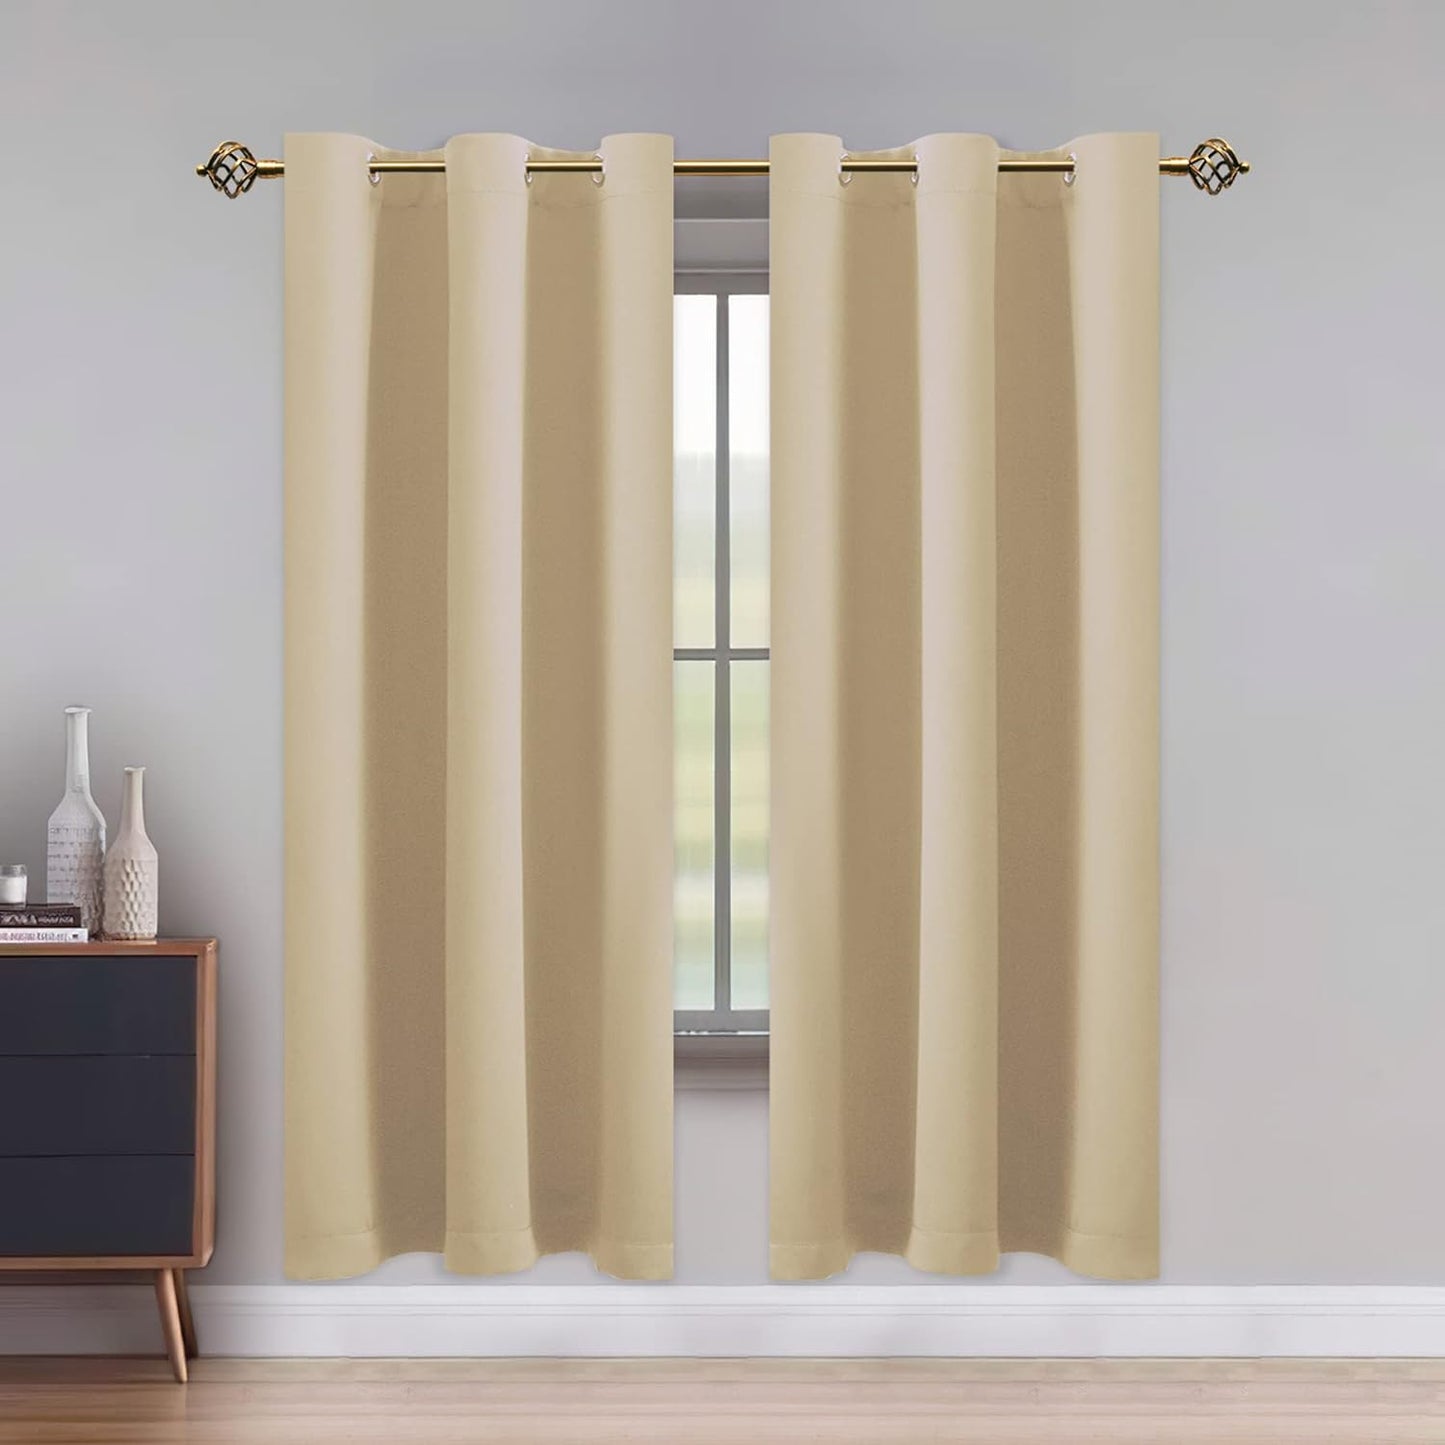 LUSHLEAF Blackout Curtains for Bedroom, Solid Thermal Insulated with Grommet Noise Reduction Window Drapes, Room Darkening Curtains for Living Room, 2 Panels, 52 X 63 Inch Grey  SHEEROOM Beige 42 X 84 Inch 